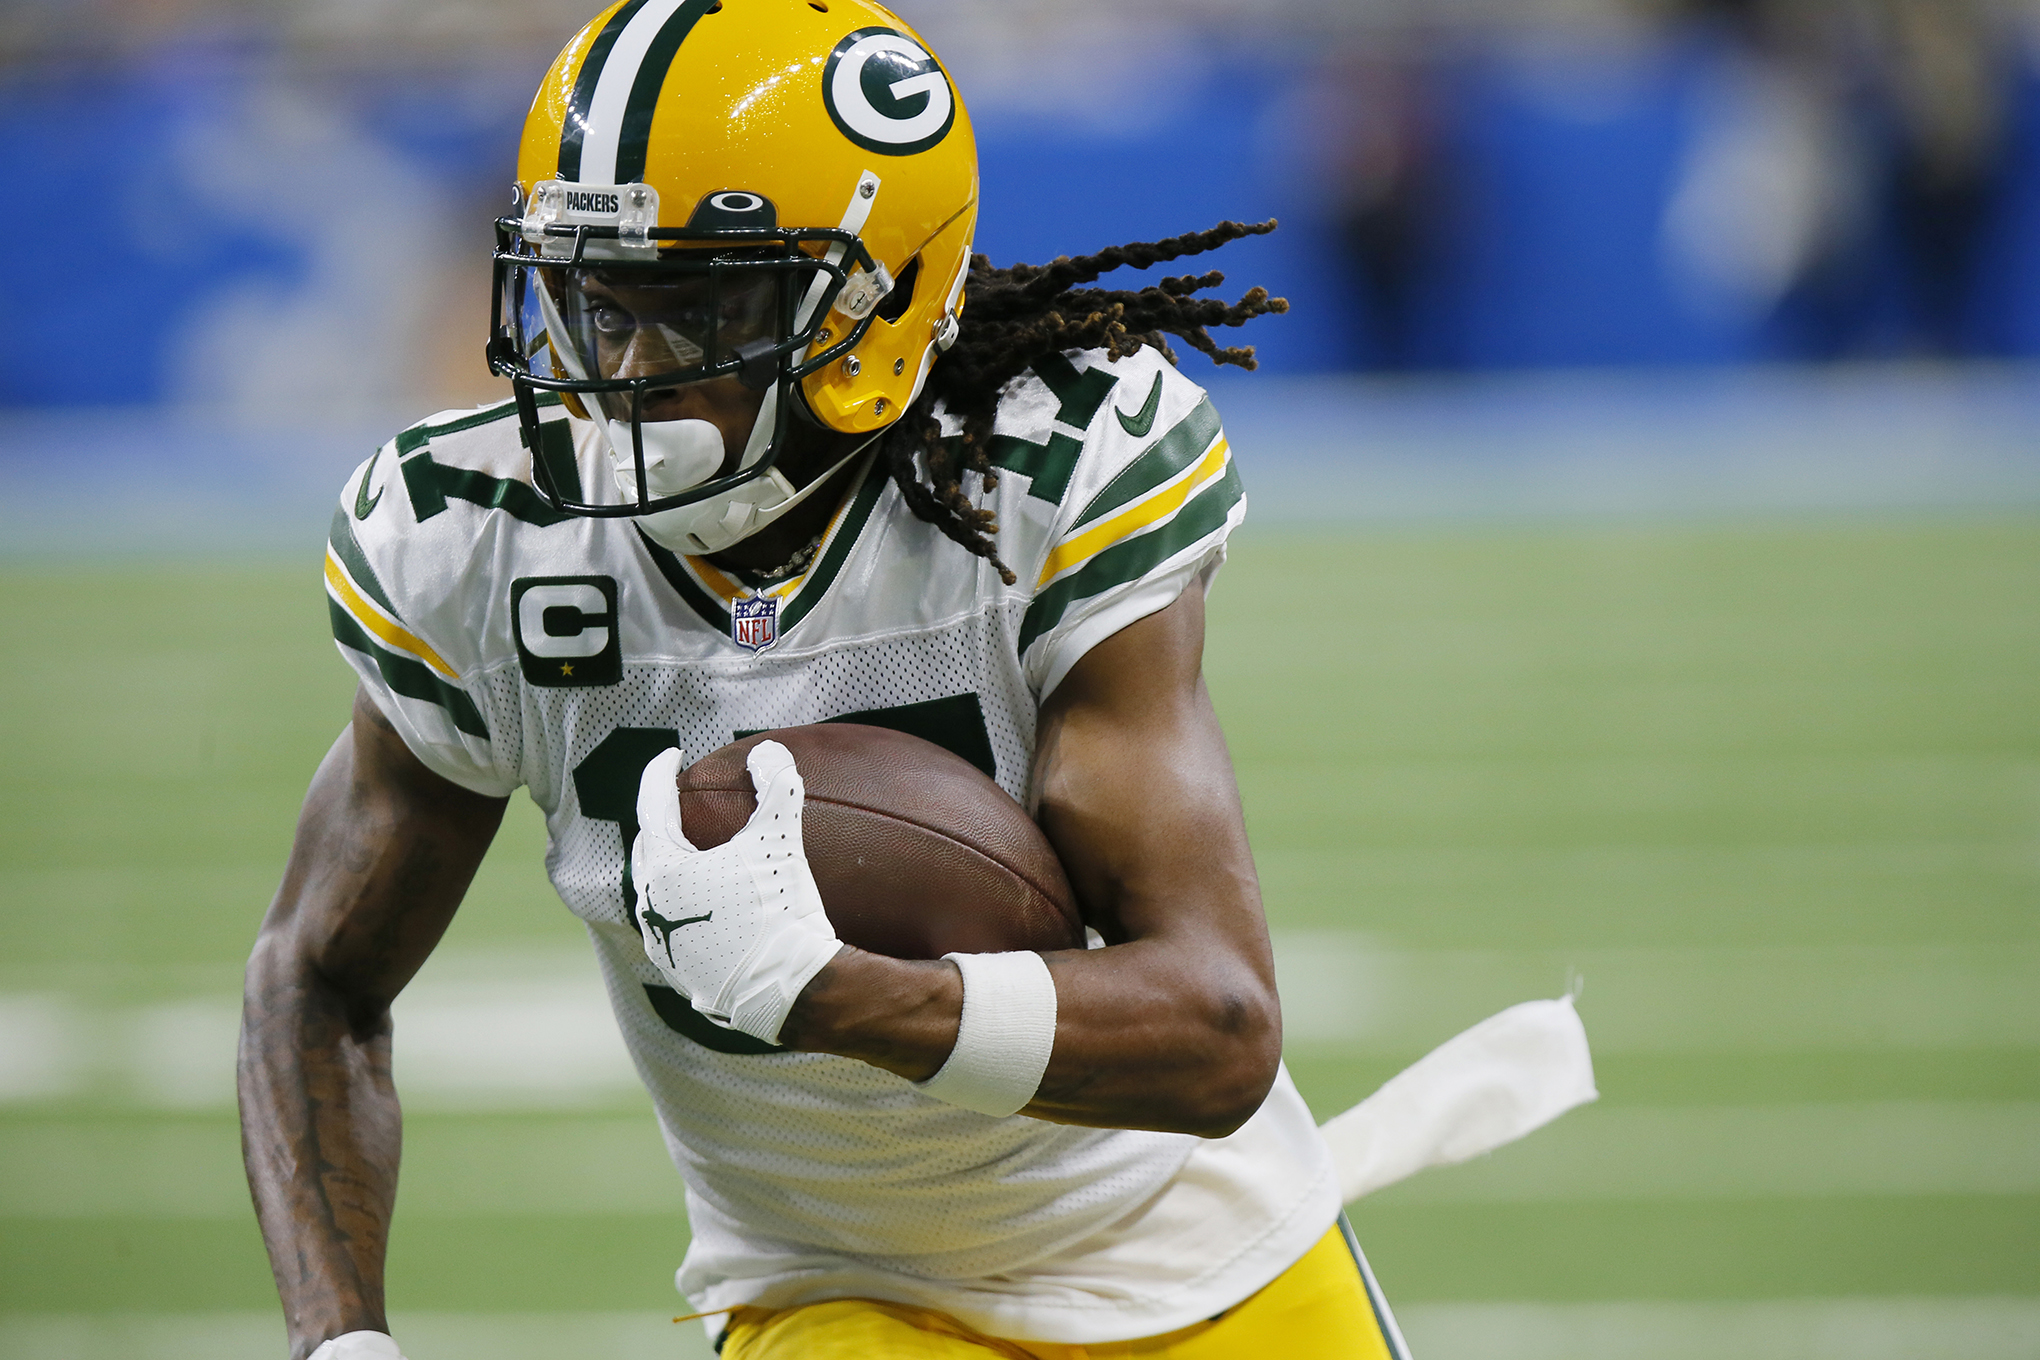 Report: Davante Adams to leave Green Bay Packers in trade with Las Vegas Raiders